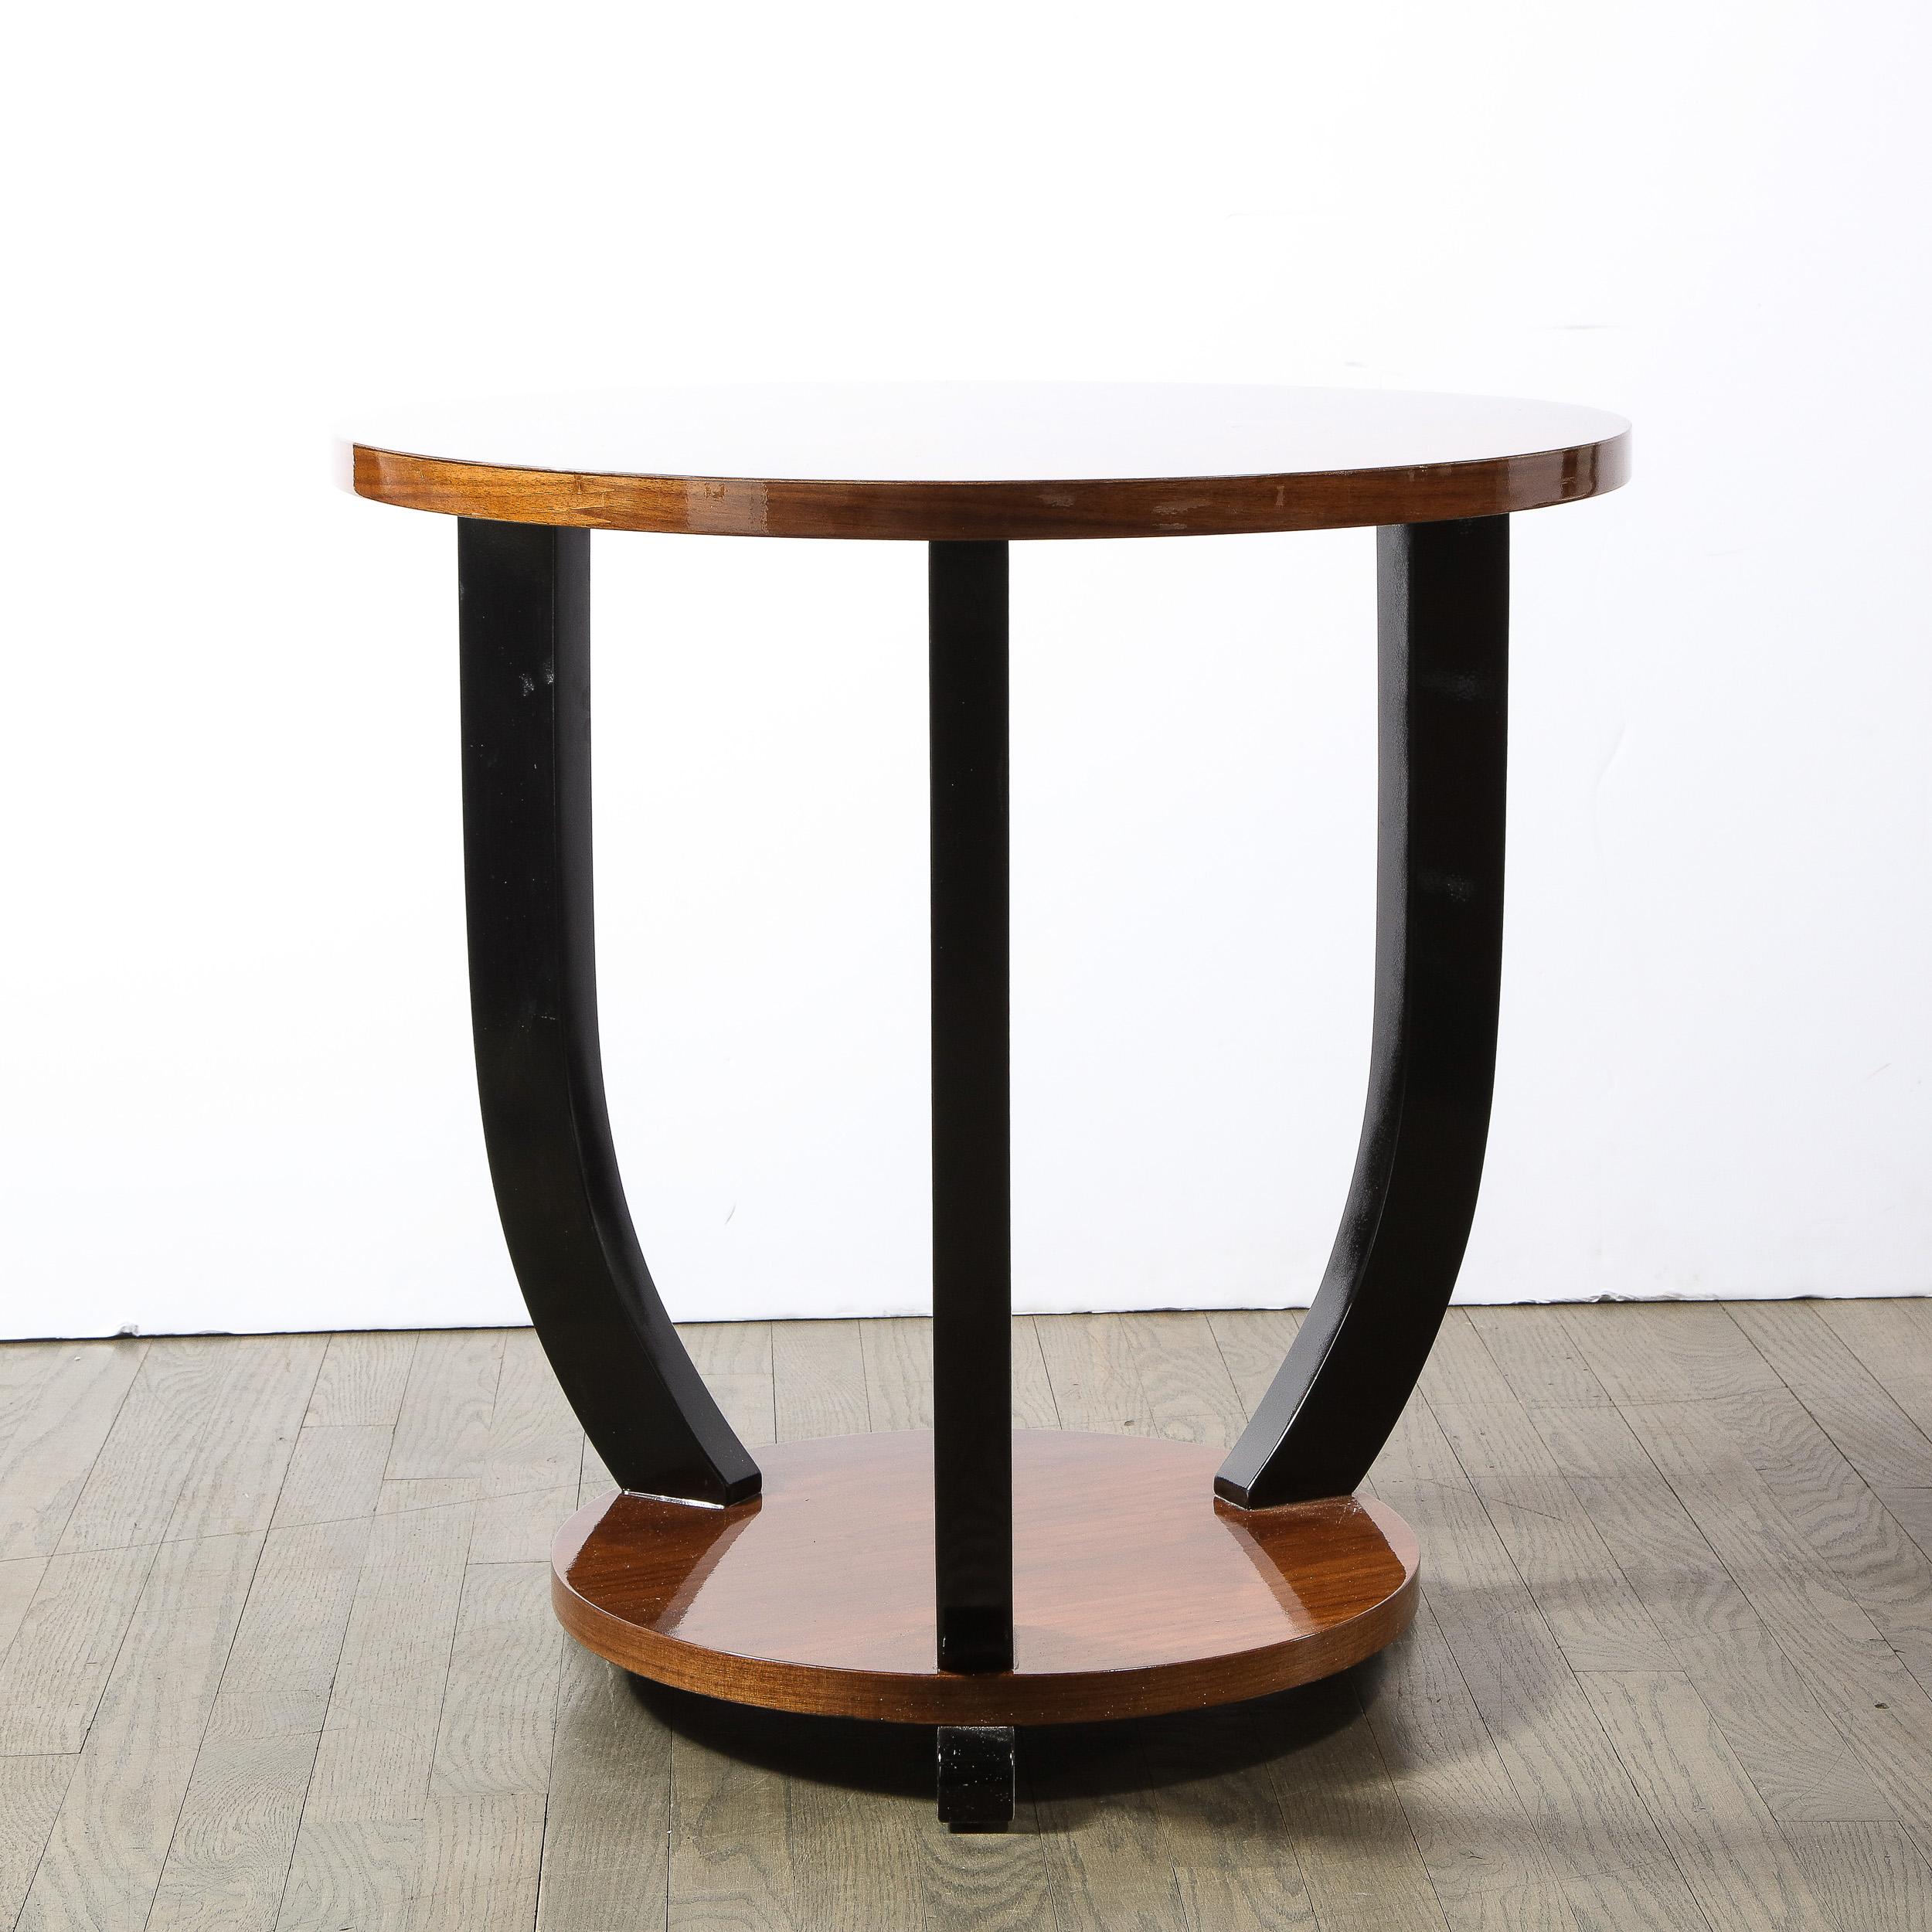 French Art Deco Two-Tiered Bookmatched Walnut & Black Lacquer Gueridon Table For Sale 7